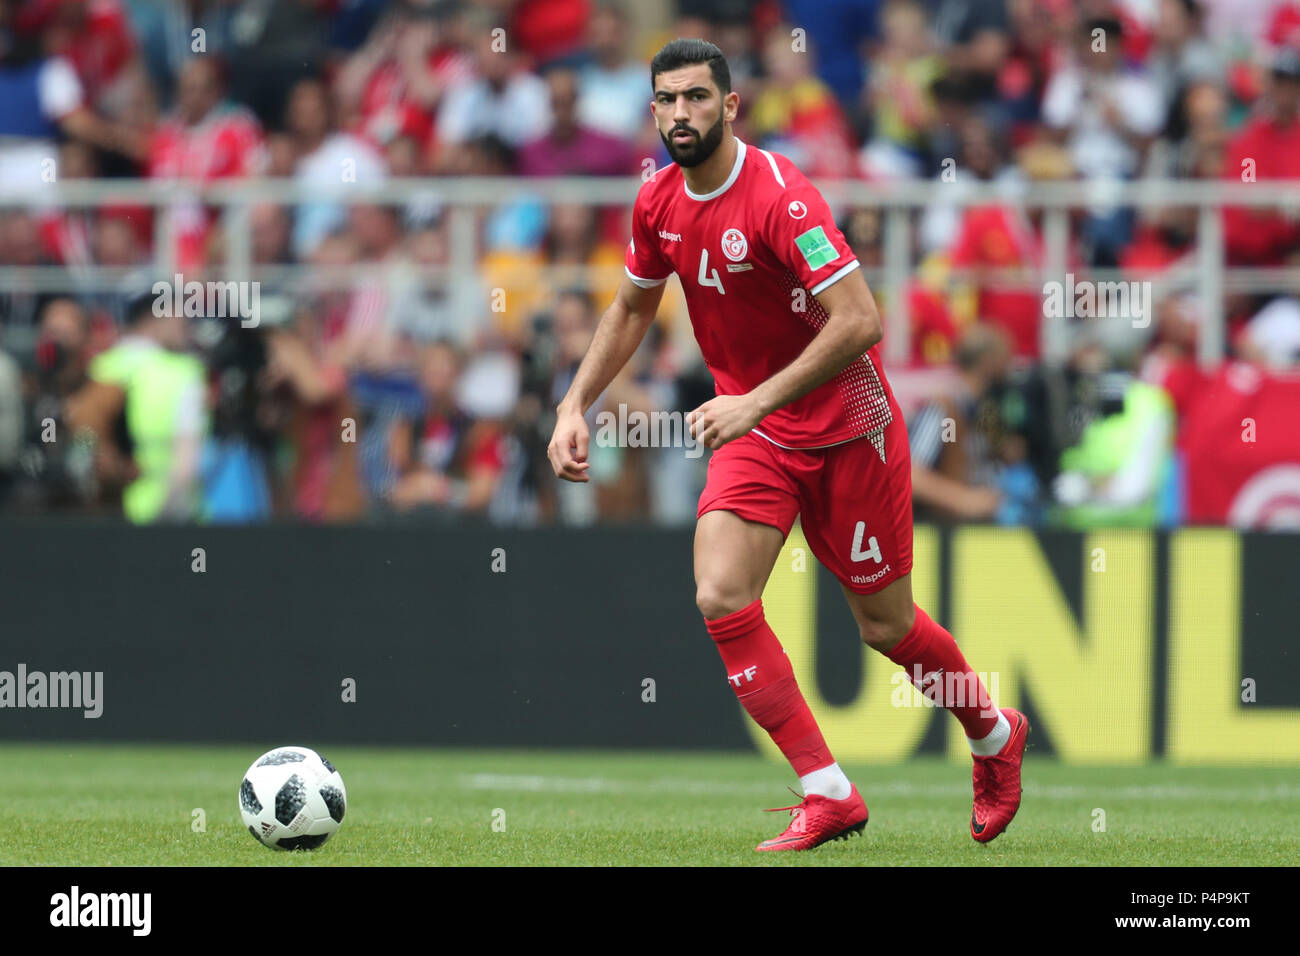 Yassine Meriah TUNISIA BELGIUM V TUNISIA, 2018 FIFA WORLD CUP RUSSIA 23 June 2018 GBC8597 Belgium v Tunisia 2018 FIFA World Cup Russia Spartak Stadium Group G STRICTLY EDITORIAL USE ONLY. If The Player/Players Depicted In This Image Is/Are Playing For An English Club Or The England National Team. Then This Image May Only Be Used For Editorial Purposes. No Commercial Use. The Following Usages Are Also Restricted EVEN IF IN AN EDITORIAL CONTEXT: Use in conjuction with, or part of, any unauthorized audio, video, data, fixture lists, club/league logos, Betting, Games or any 'li Stock Photo